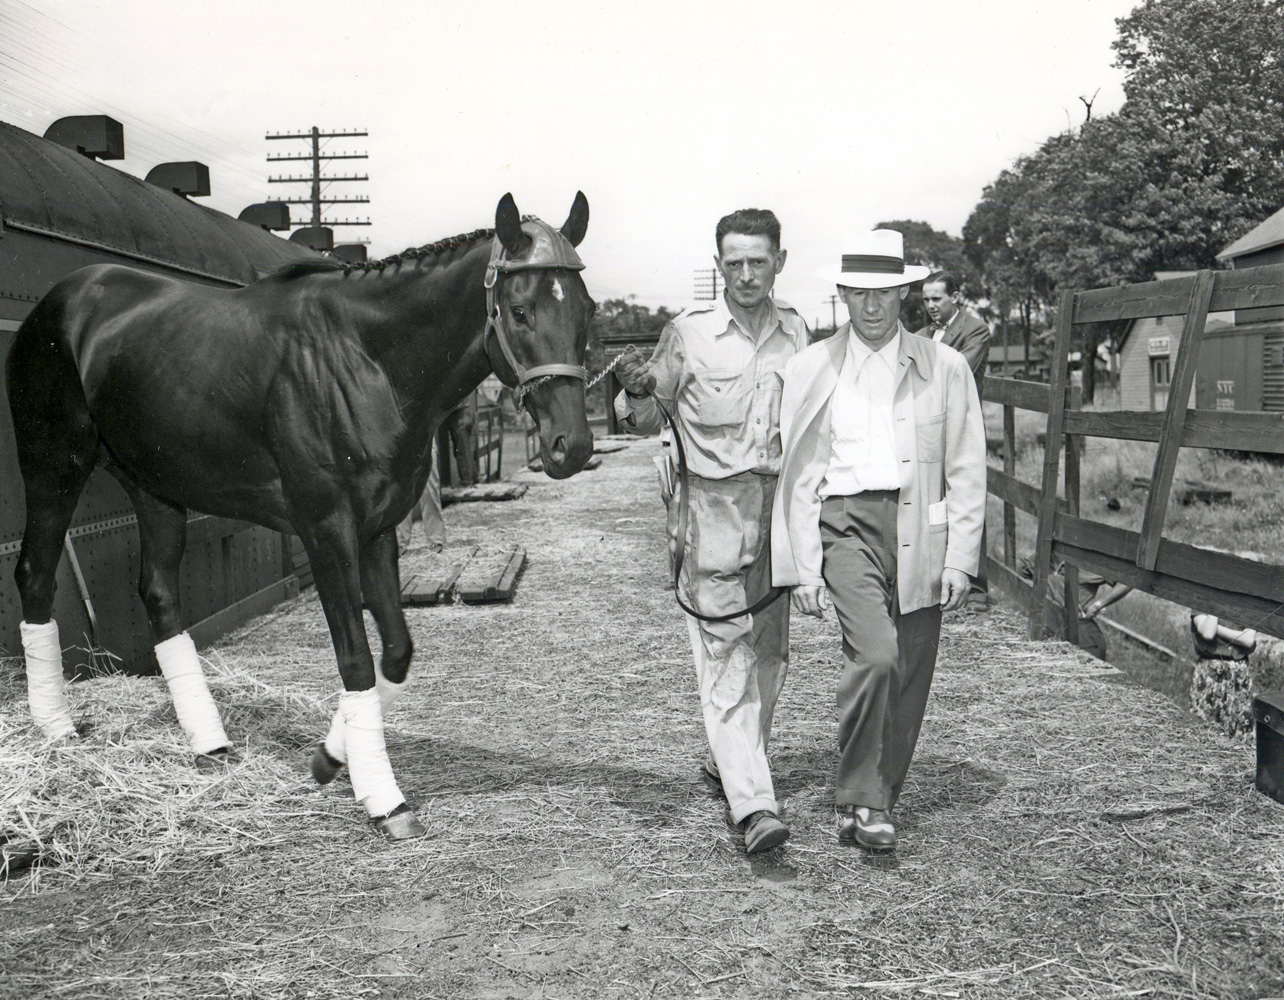 Noor arriving by train at Saratoga with trainer Burley Parke, August 1950 (Keeneland Library Morgan Collection/Museum Collection)